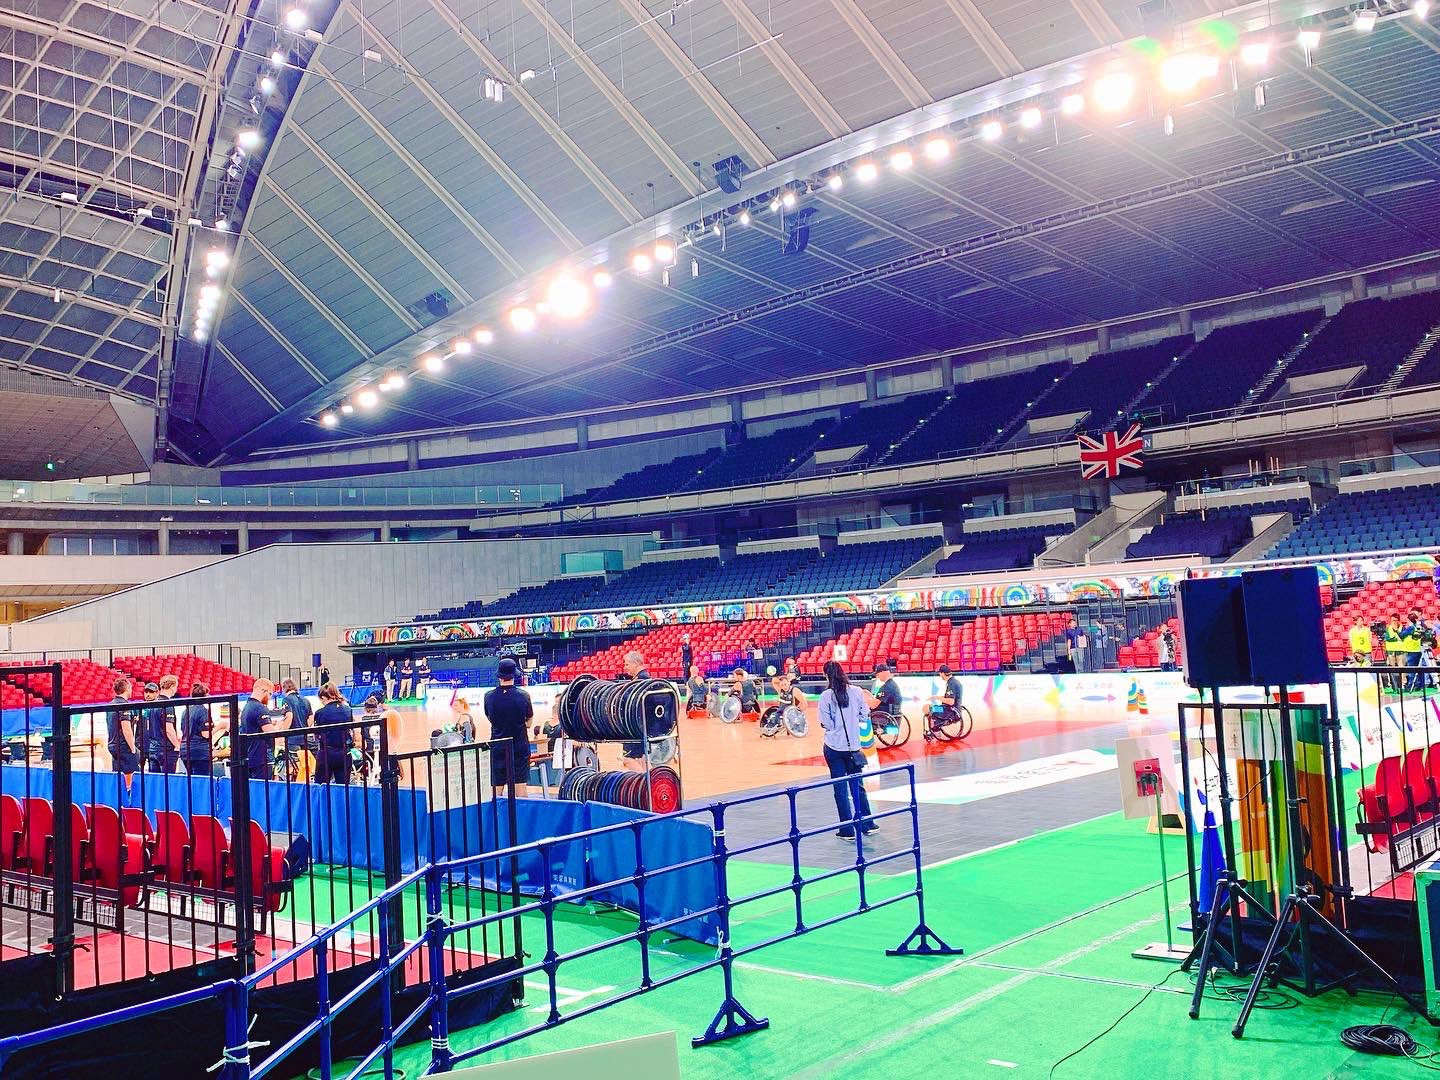 The Tokyo Metropolitan Gymnasium will host the table tennis events at Tokyo 2020 ©IWBF